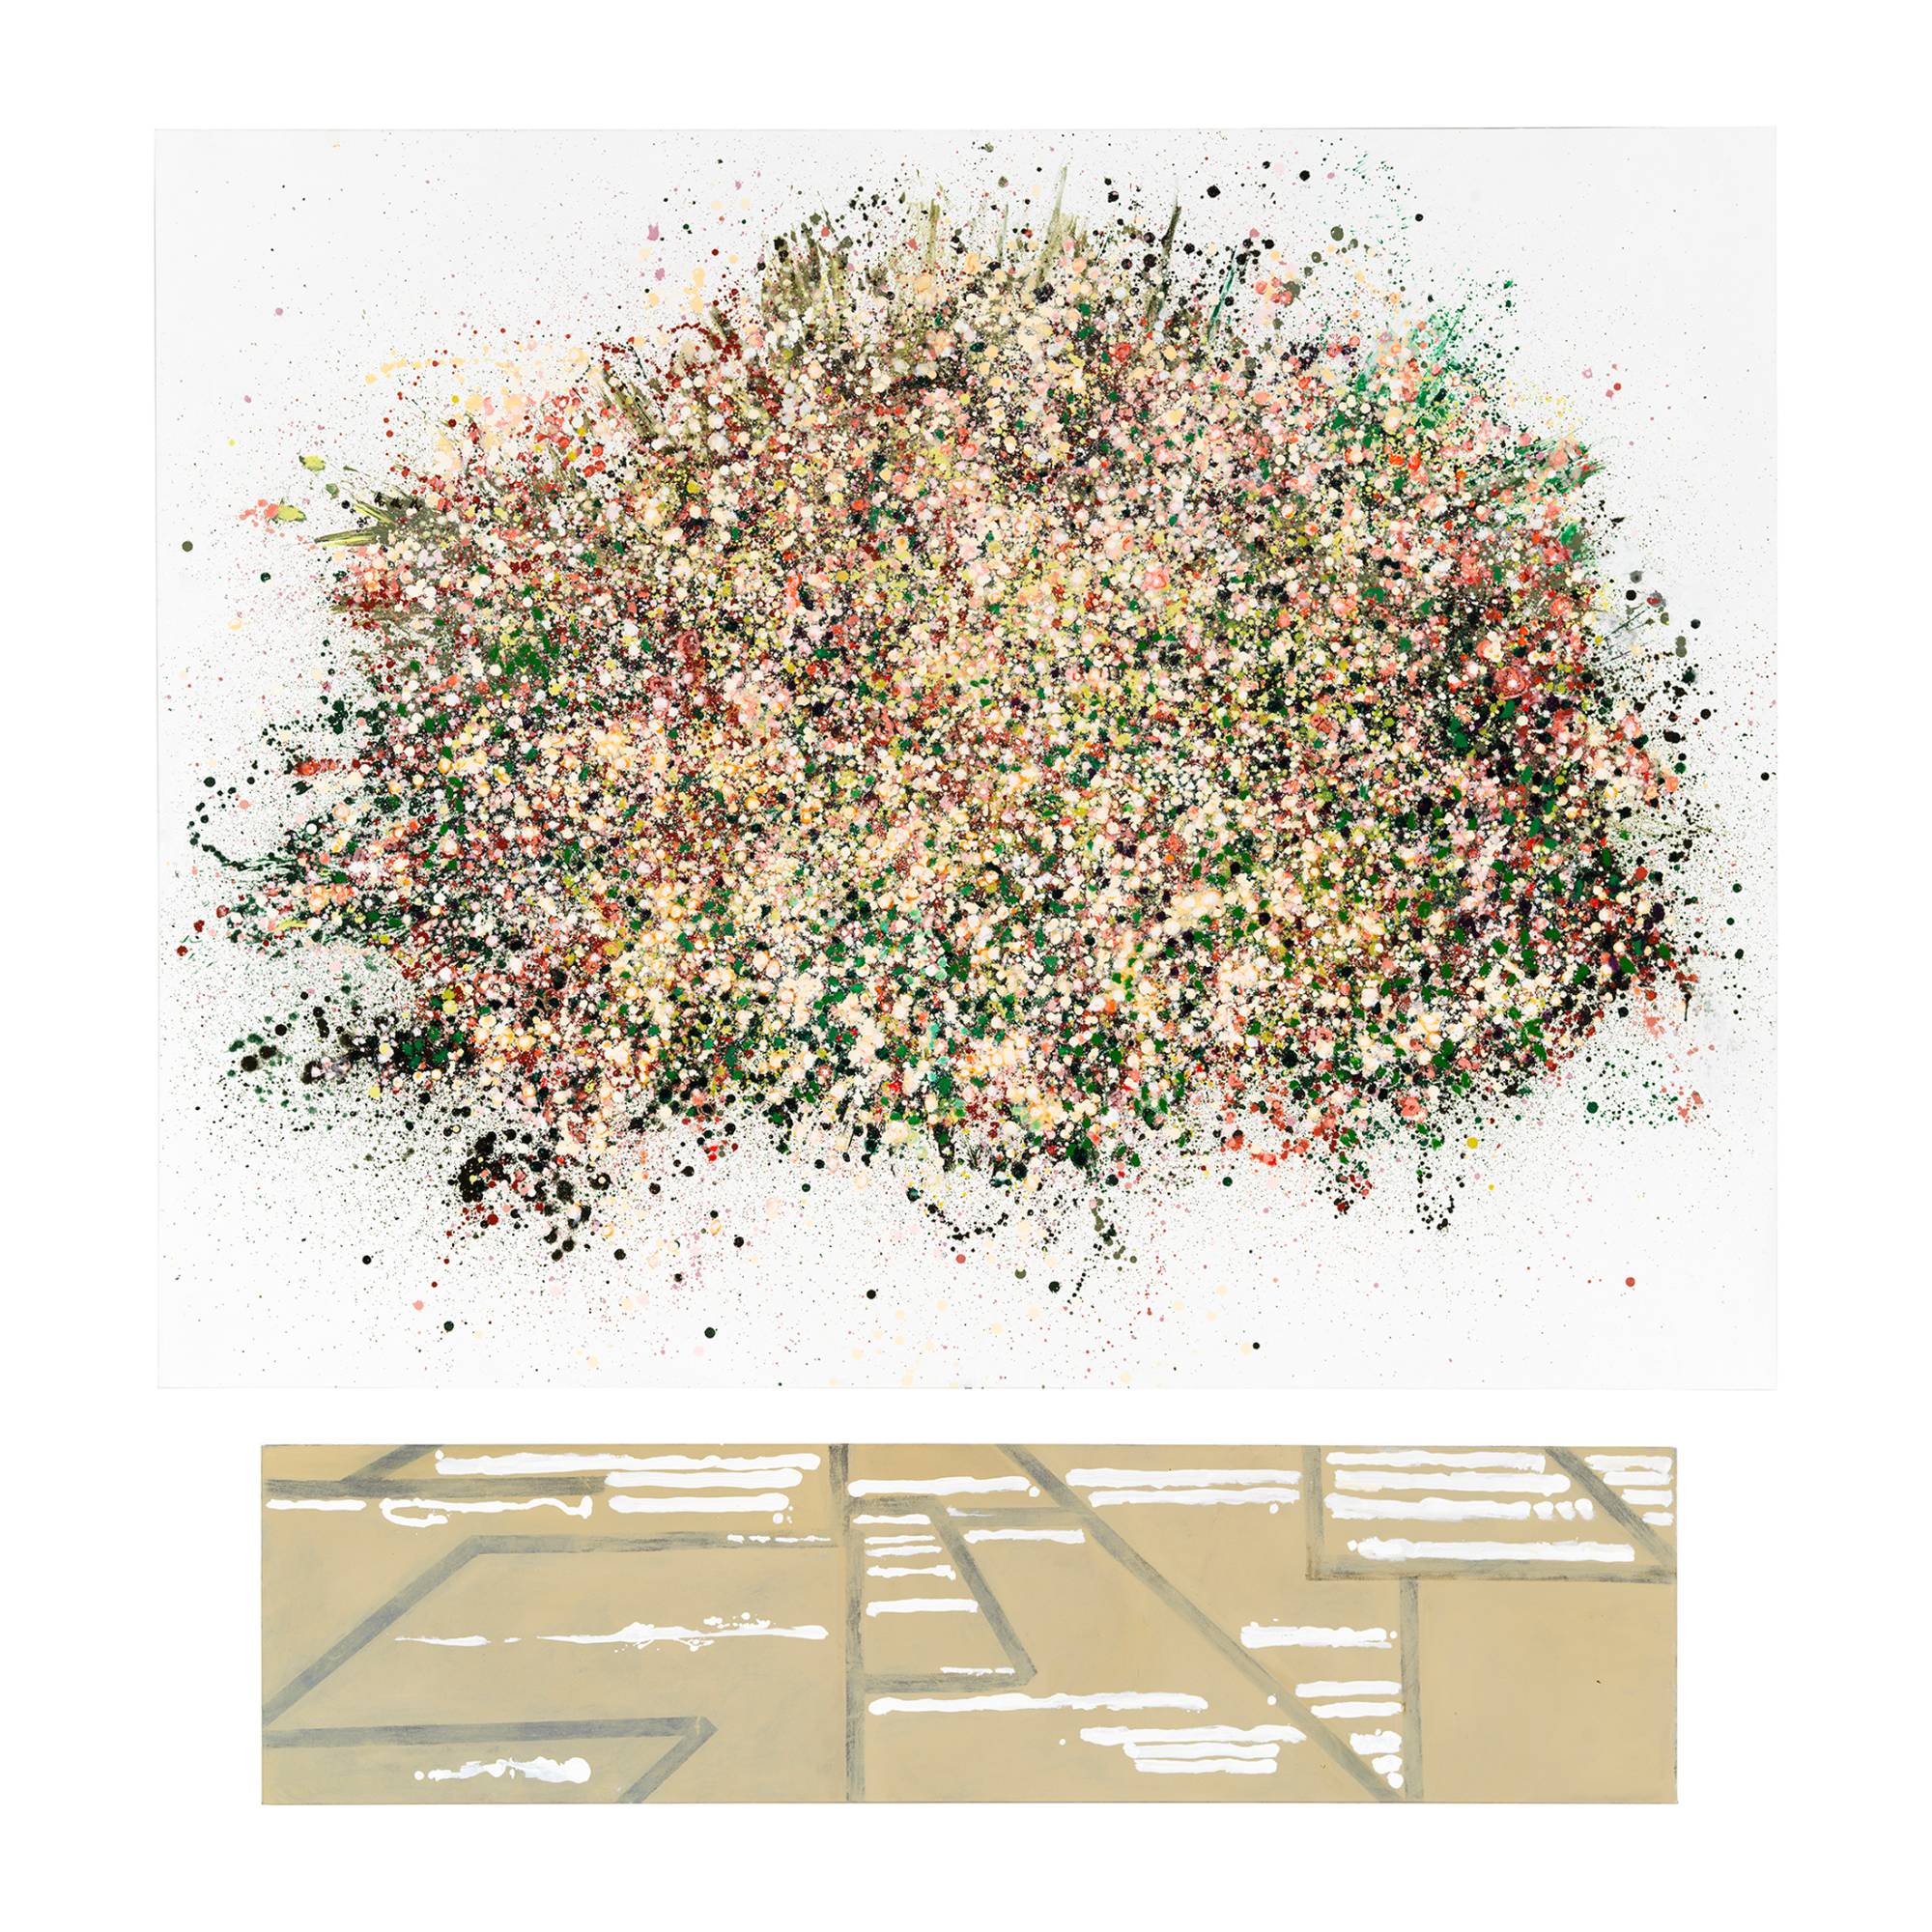 Painting by Vera Klement titled 'Blossoming' depicting a large field of colored paint slatters in pink, yellow, green, beige, and red floating on a white background above an abstract beige and green field in aerial view